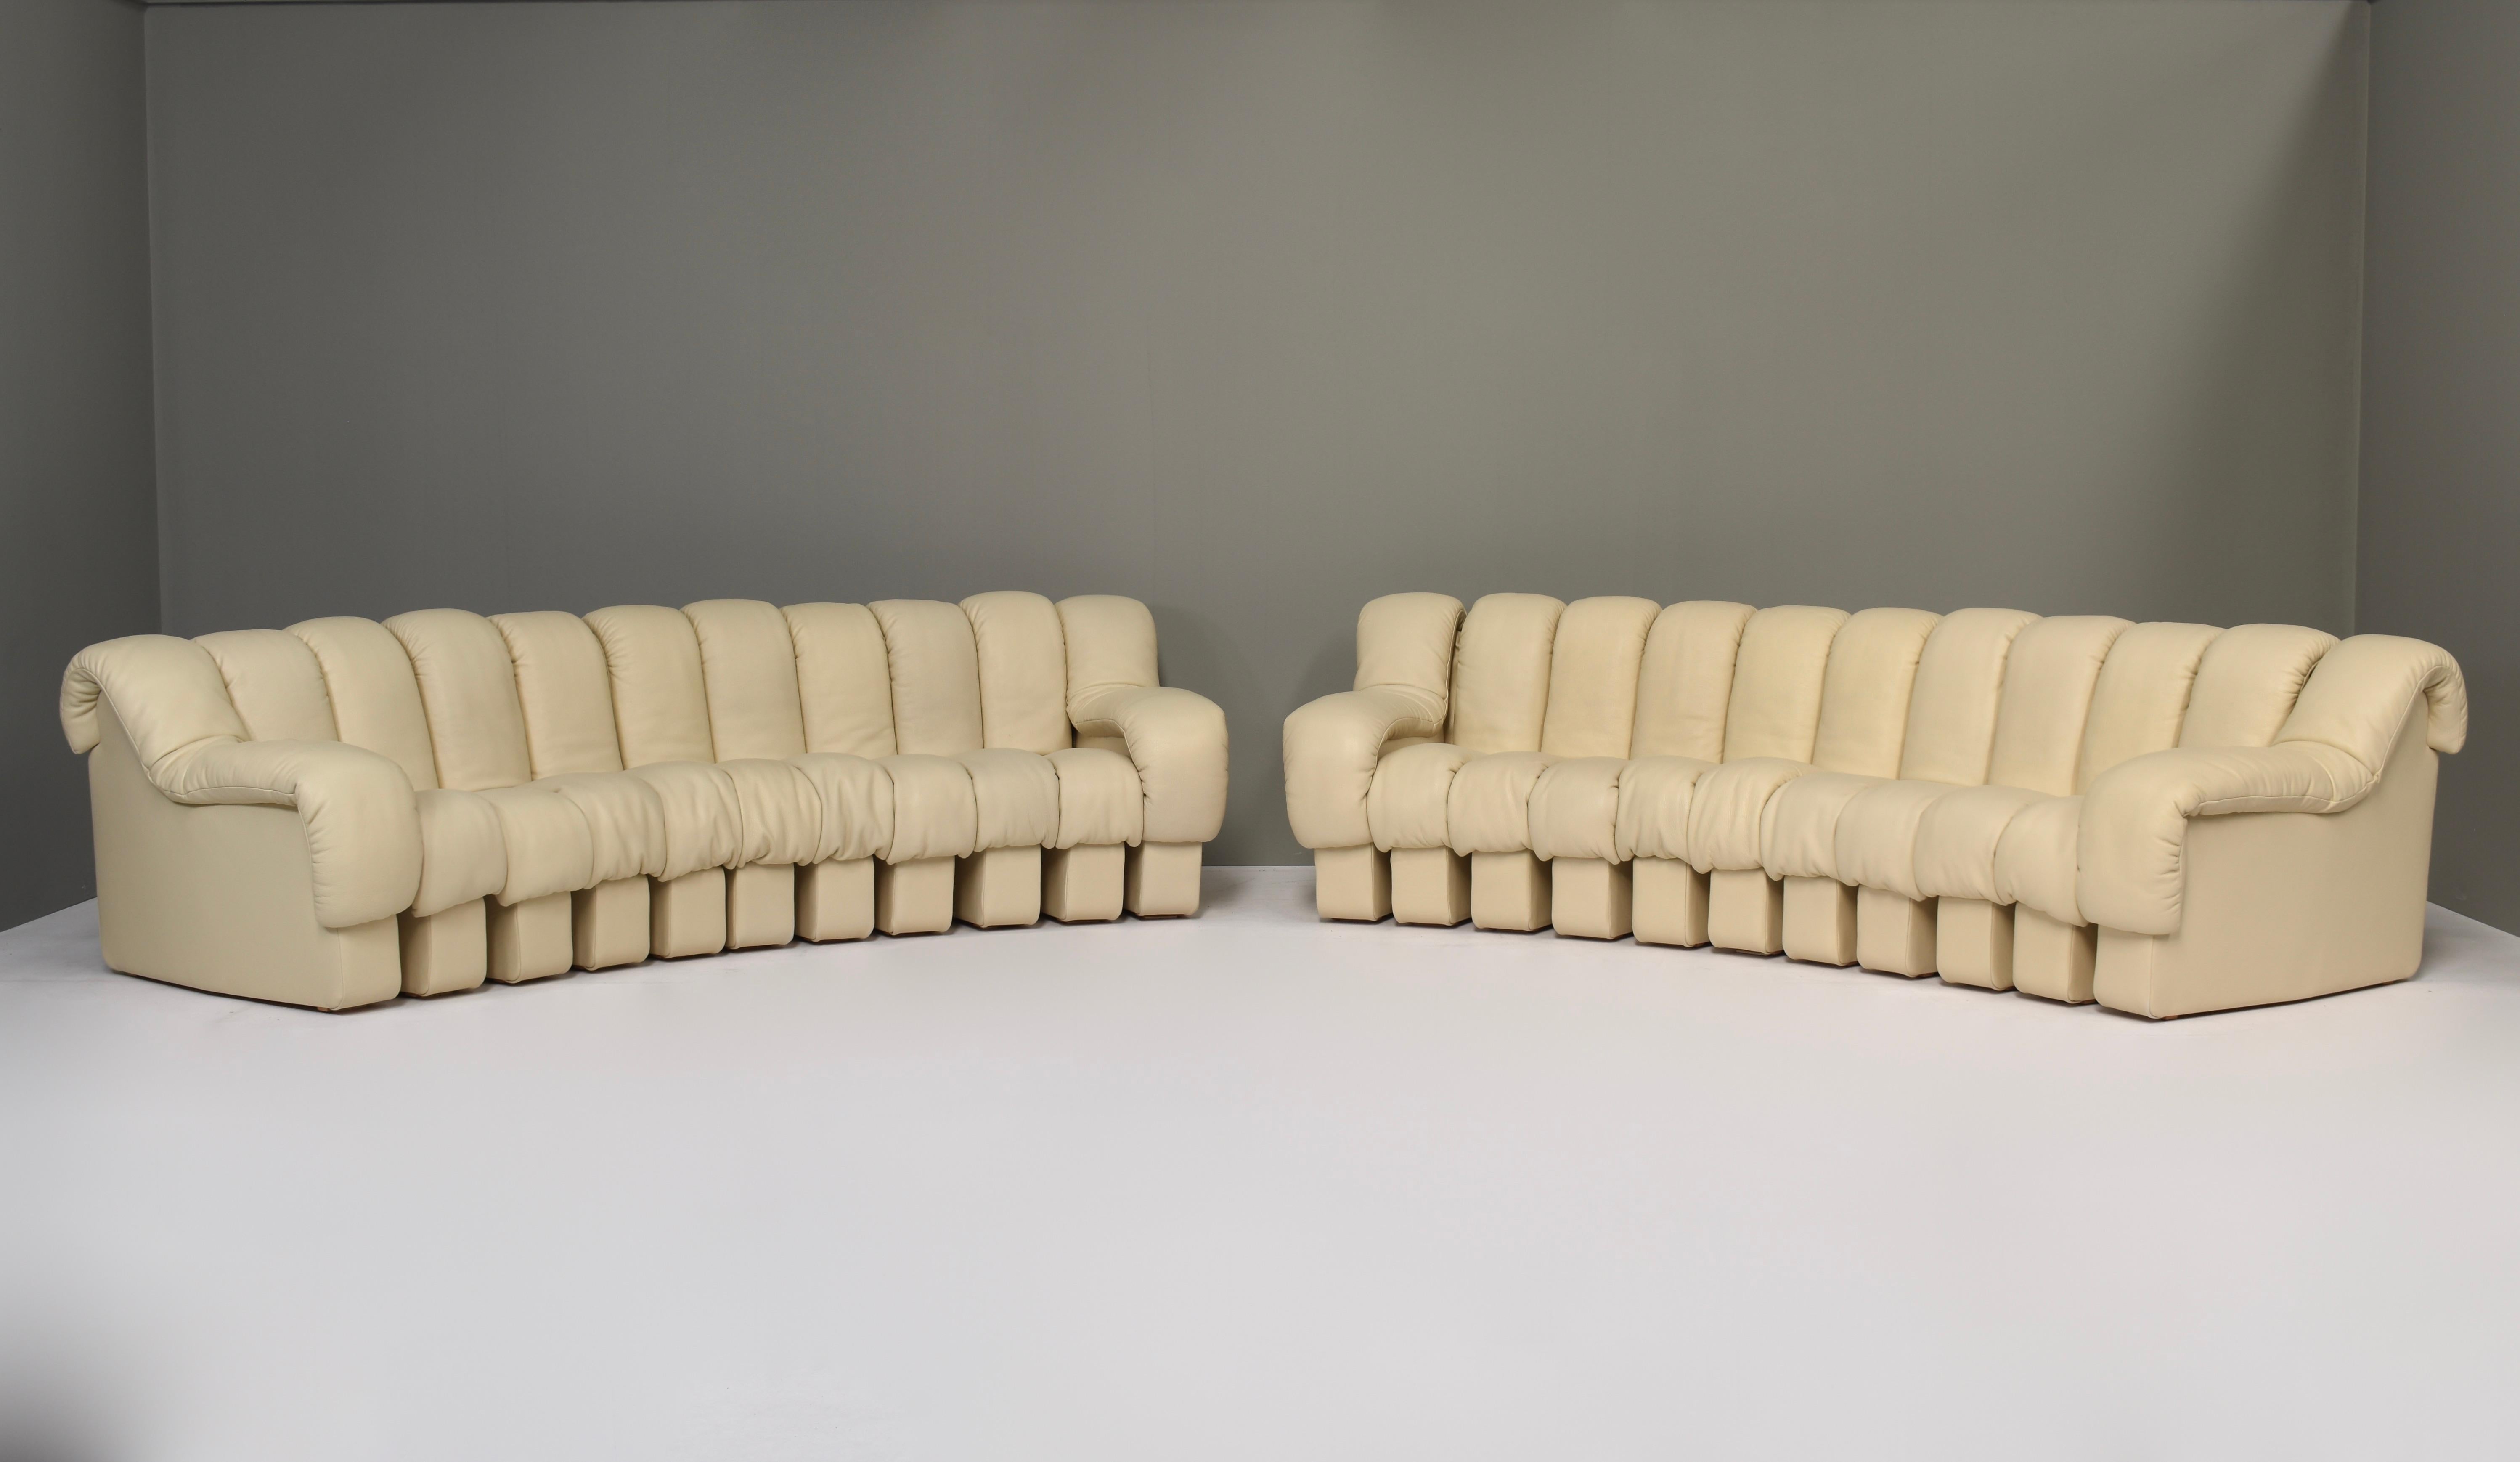 26 Pieces Ds600 Sectional Sofa and Chairs by De Sede in Crème Leather 3